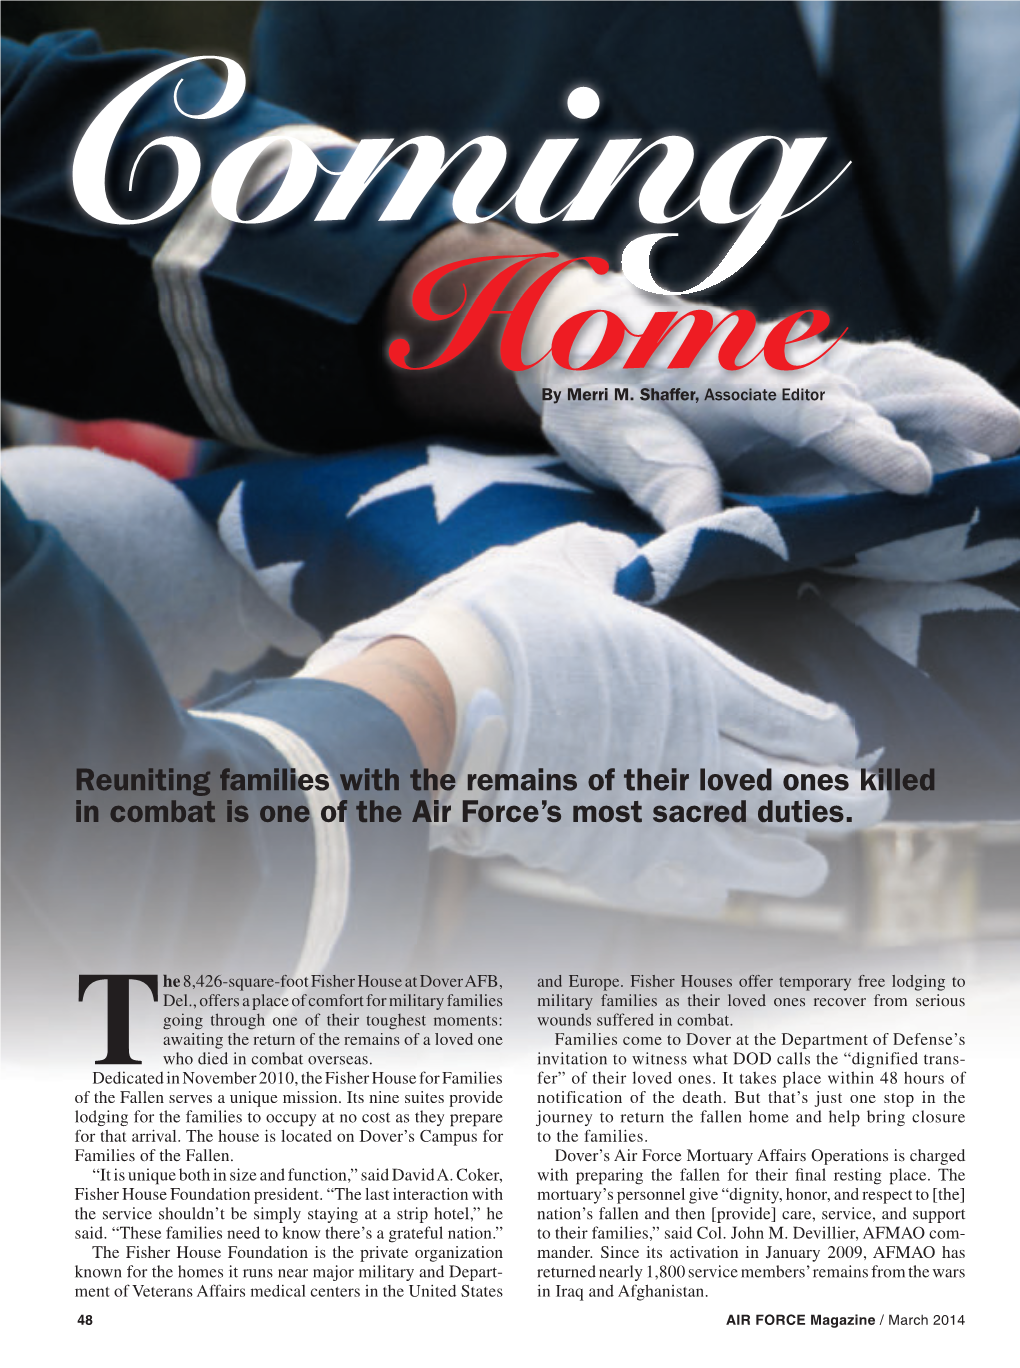 Reuniting Families with the Remains of Their Loved Ones Killed in Combat Is One of the Air Force's Most Sacred Duties